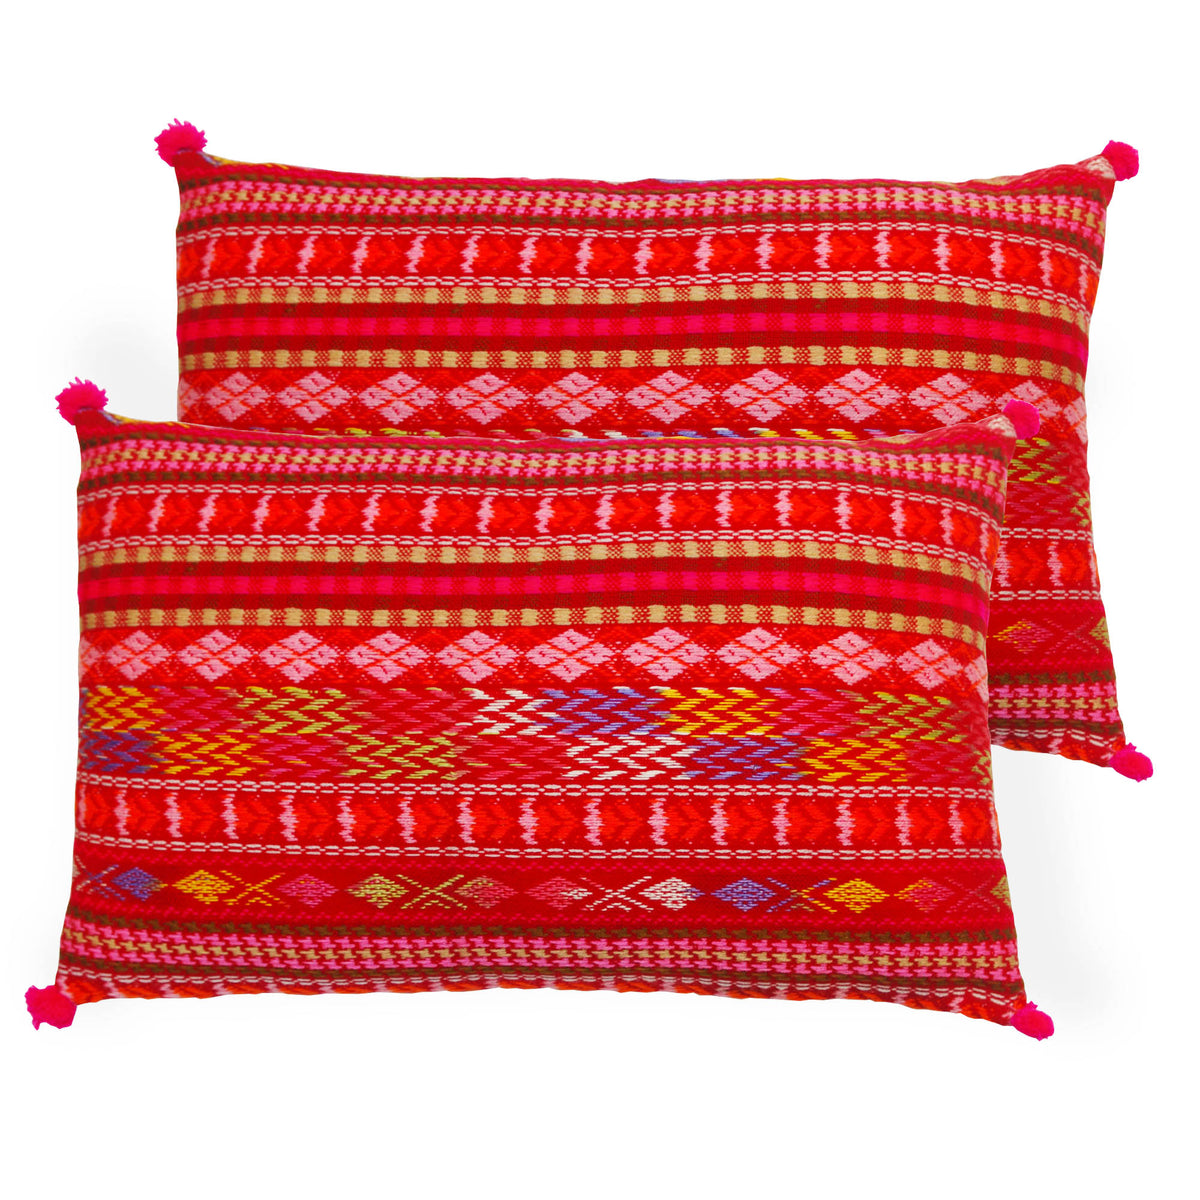 Pack of 2 Oblong Handloom Cotton Pillow Covers - Red Pink